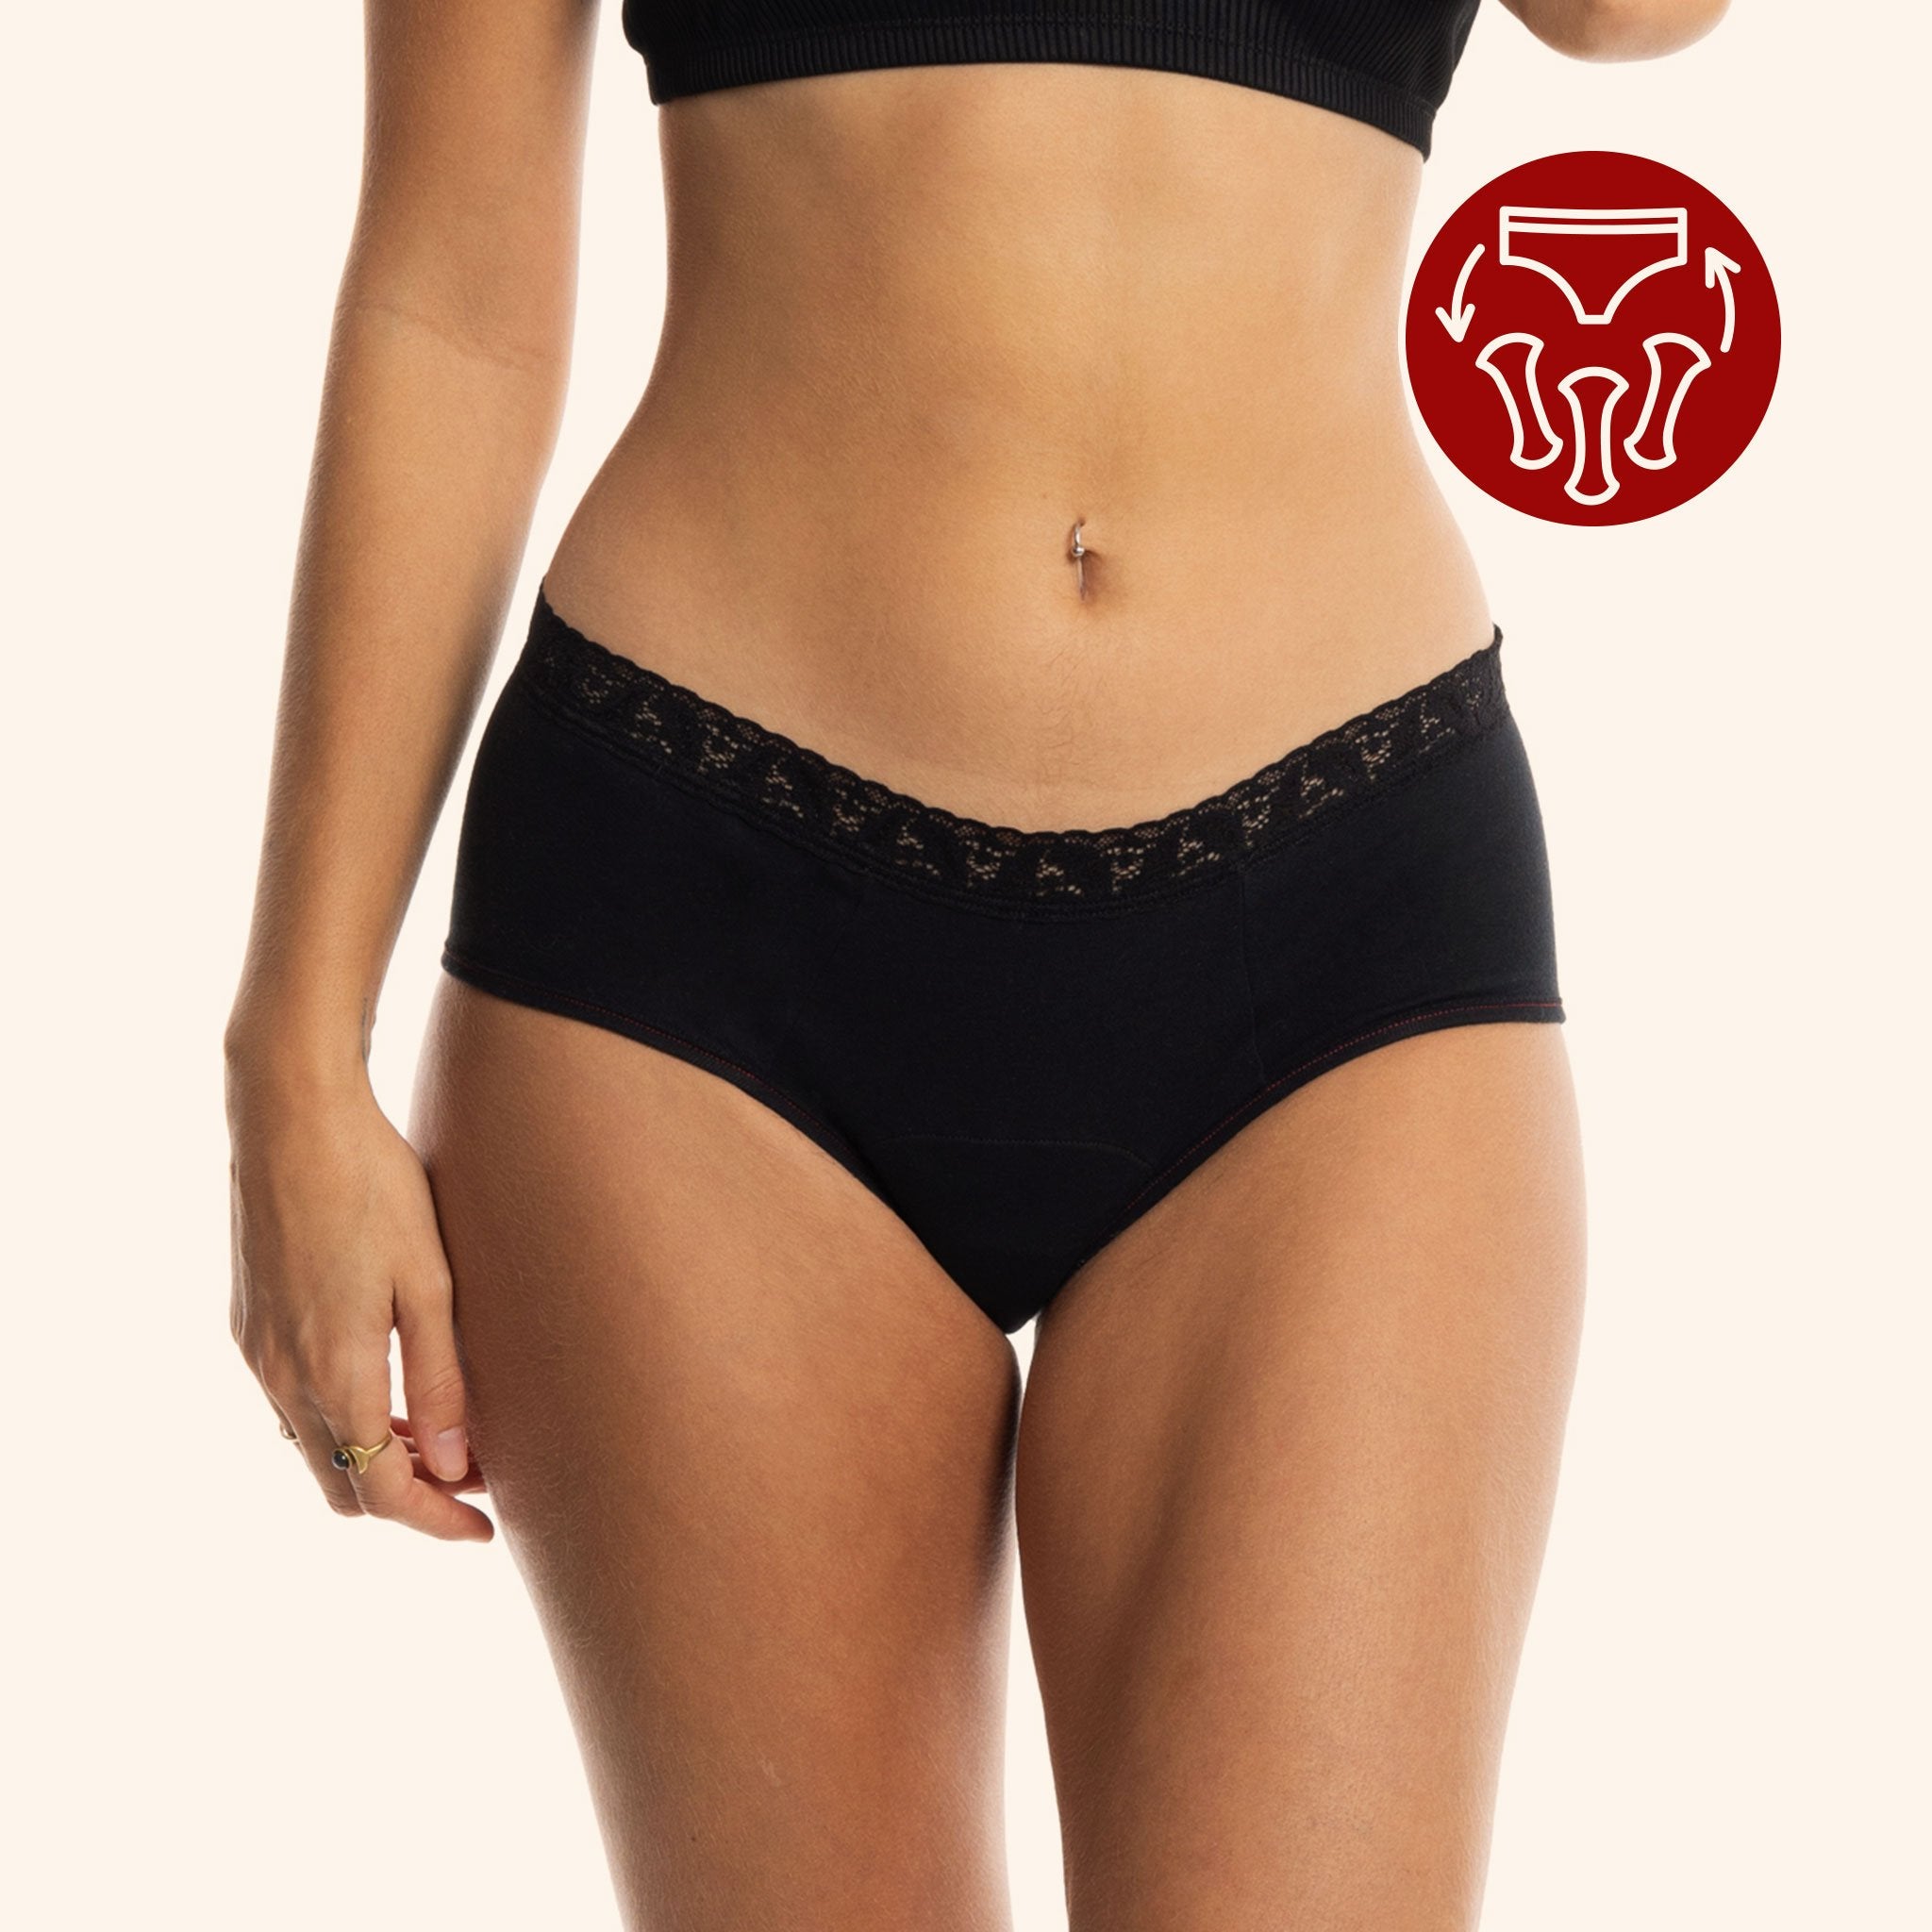 The Shorty Lace Panty : Period underwear with 3 pads